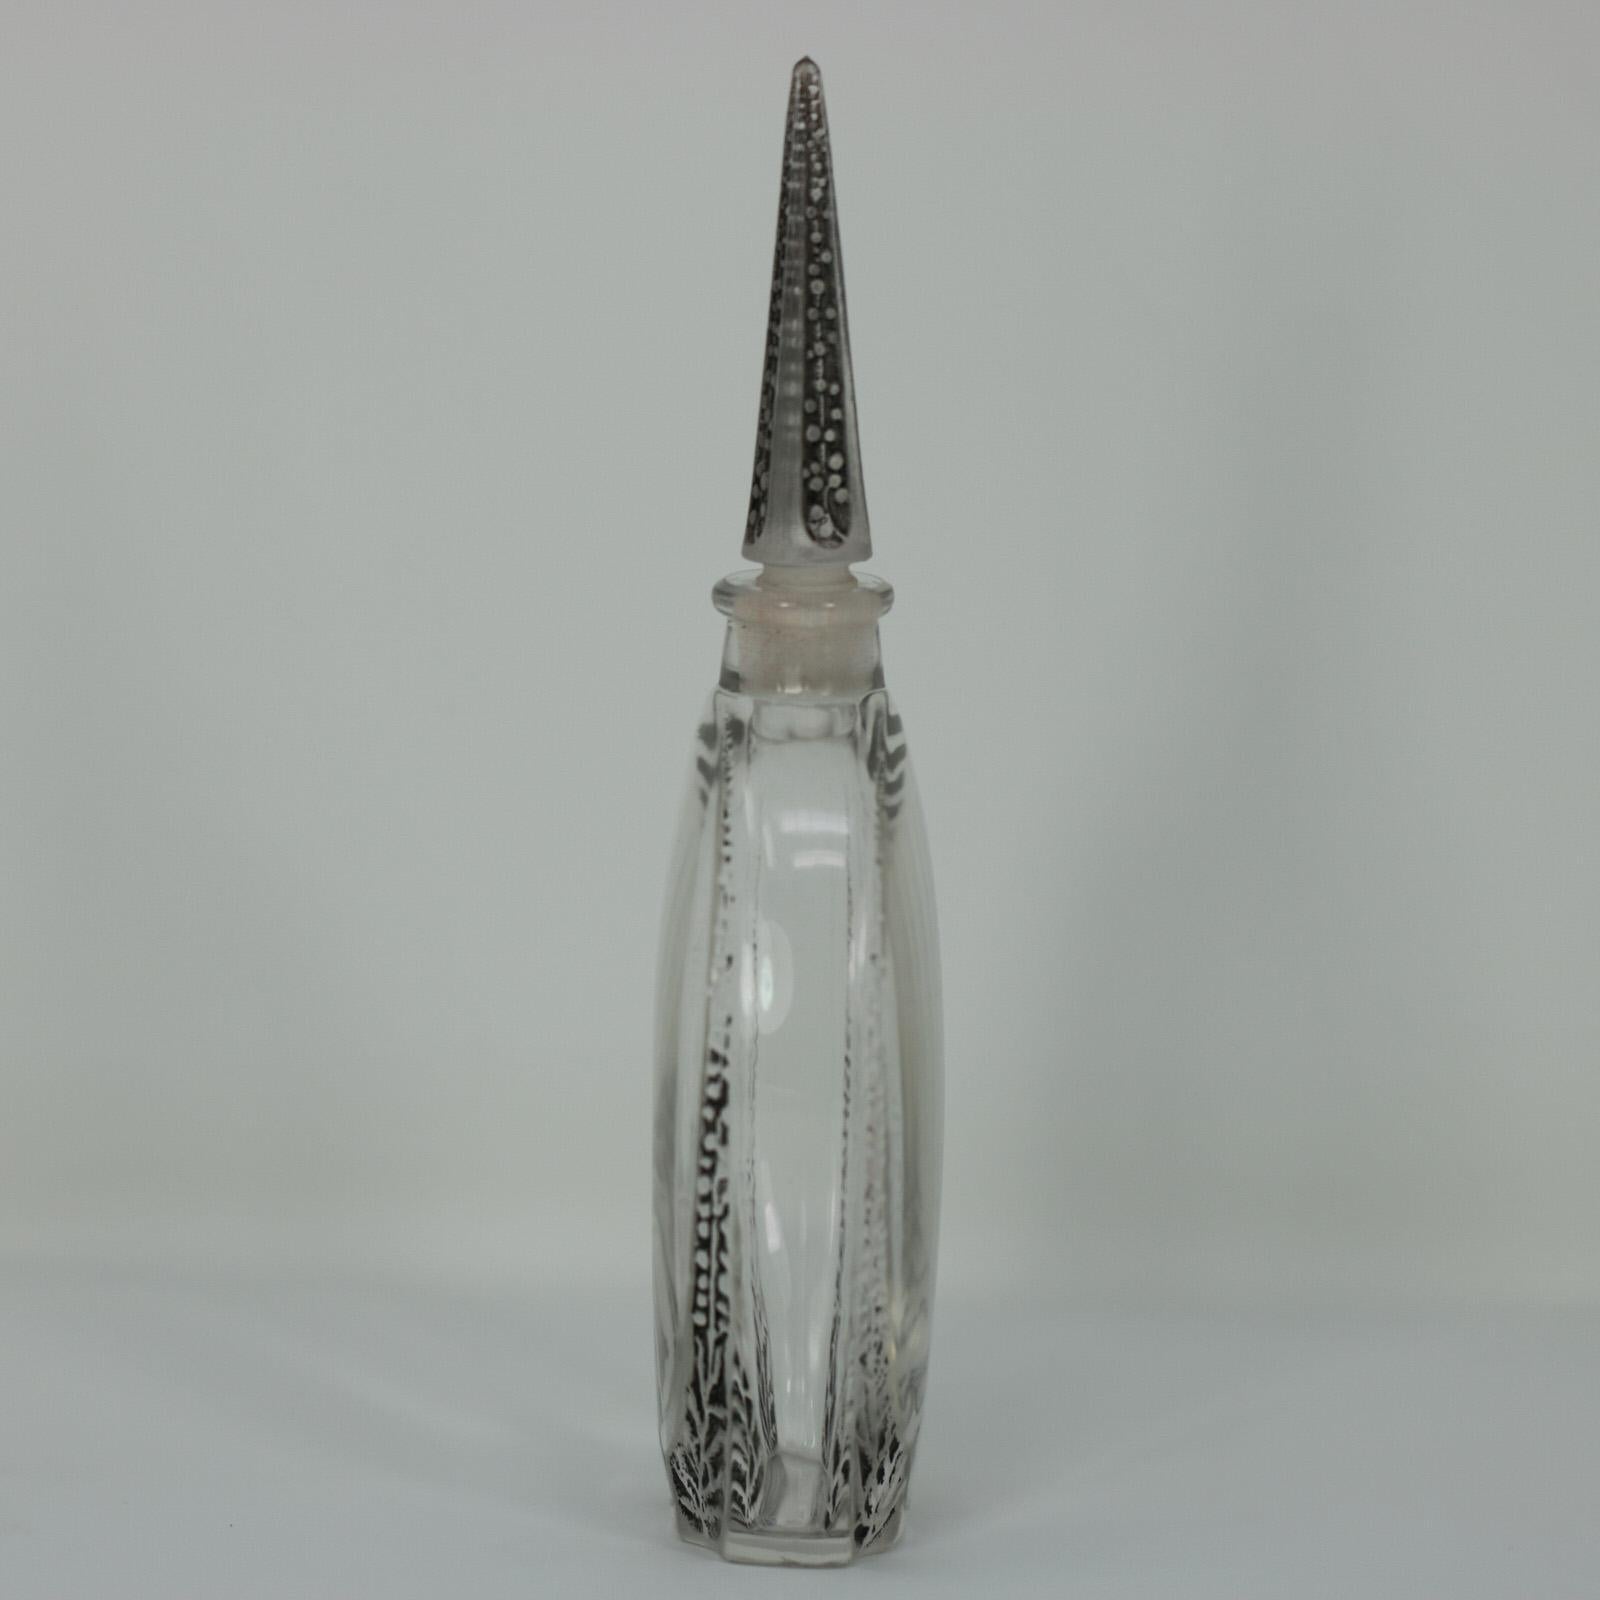 René Lalique clear glass, black patinated perfume bottle. 'Sur Deux Notes' design. This design features flowers rising up the sides of the bottle and a striking stopper in the shape of an enlongated pyramid. Moulded makers mark, 'LALIQUE'. Engraved